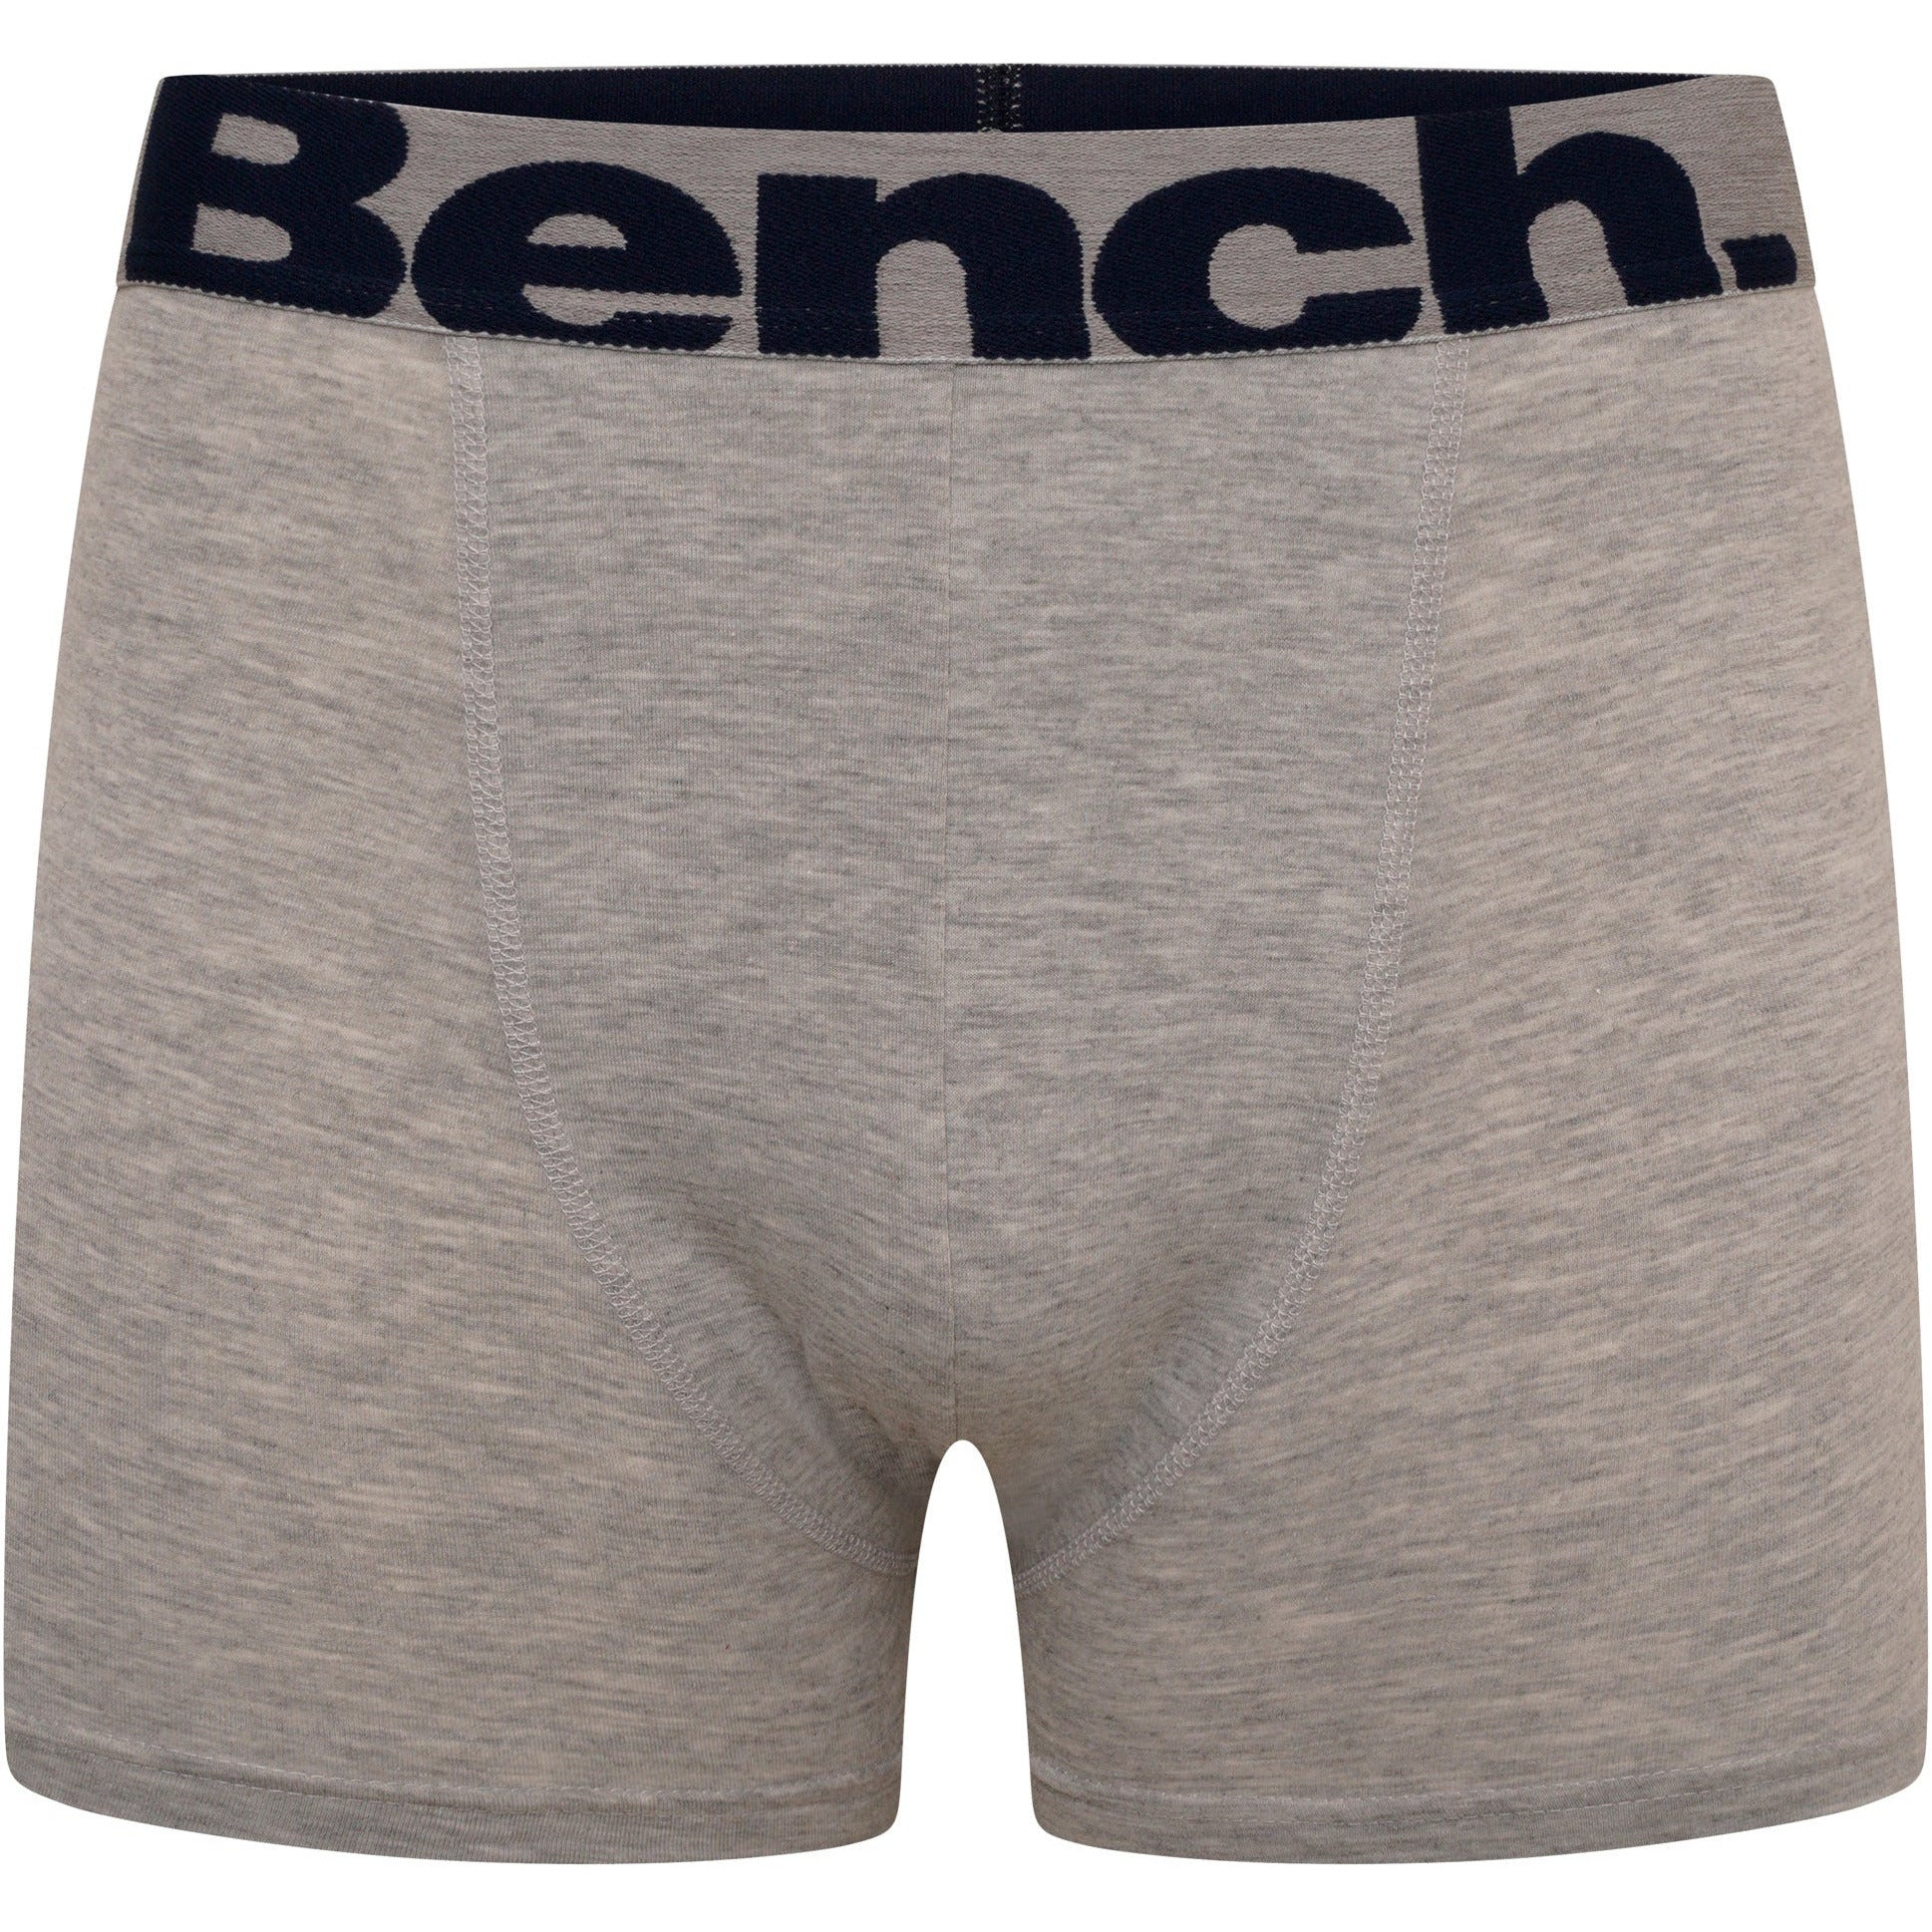 Mens 'YALDEN' 10 Pack Boxers - ASSORTED - Shop at www.Bench.co.uk #LoveMyHood